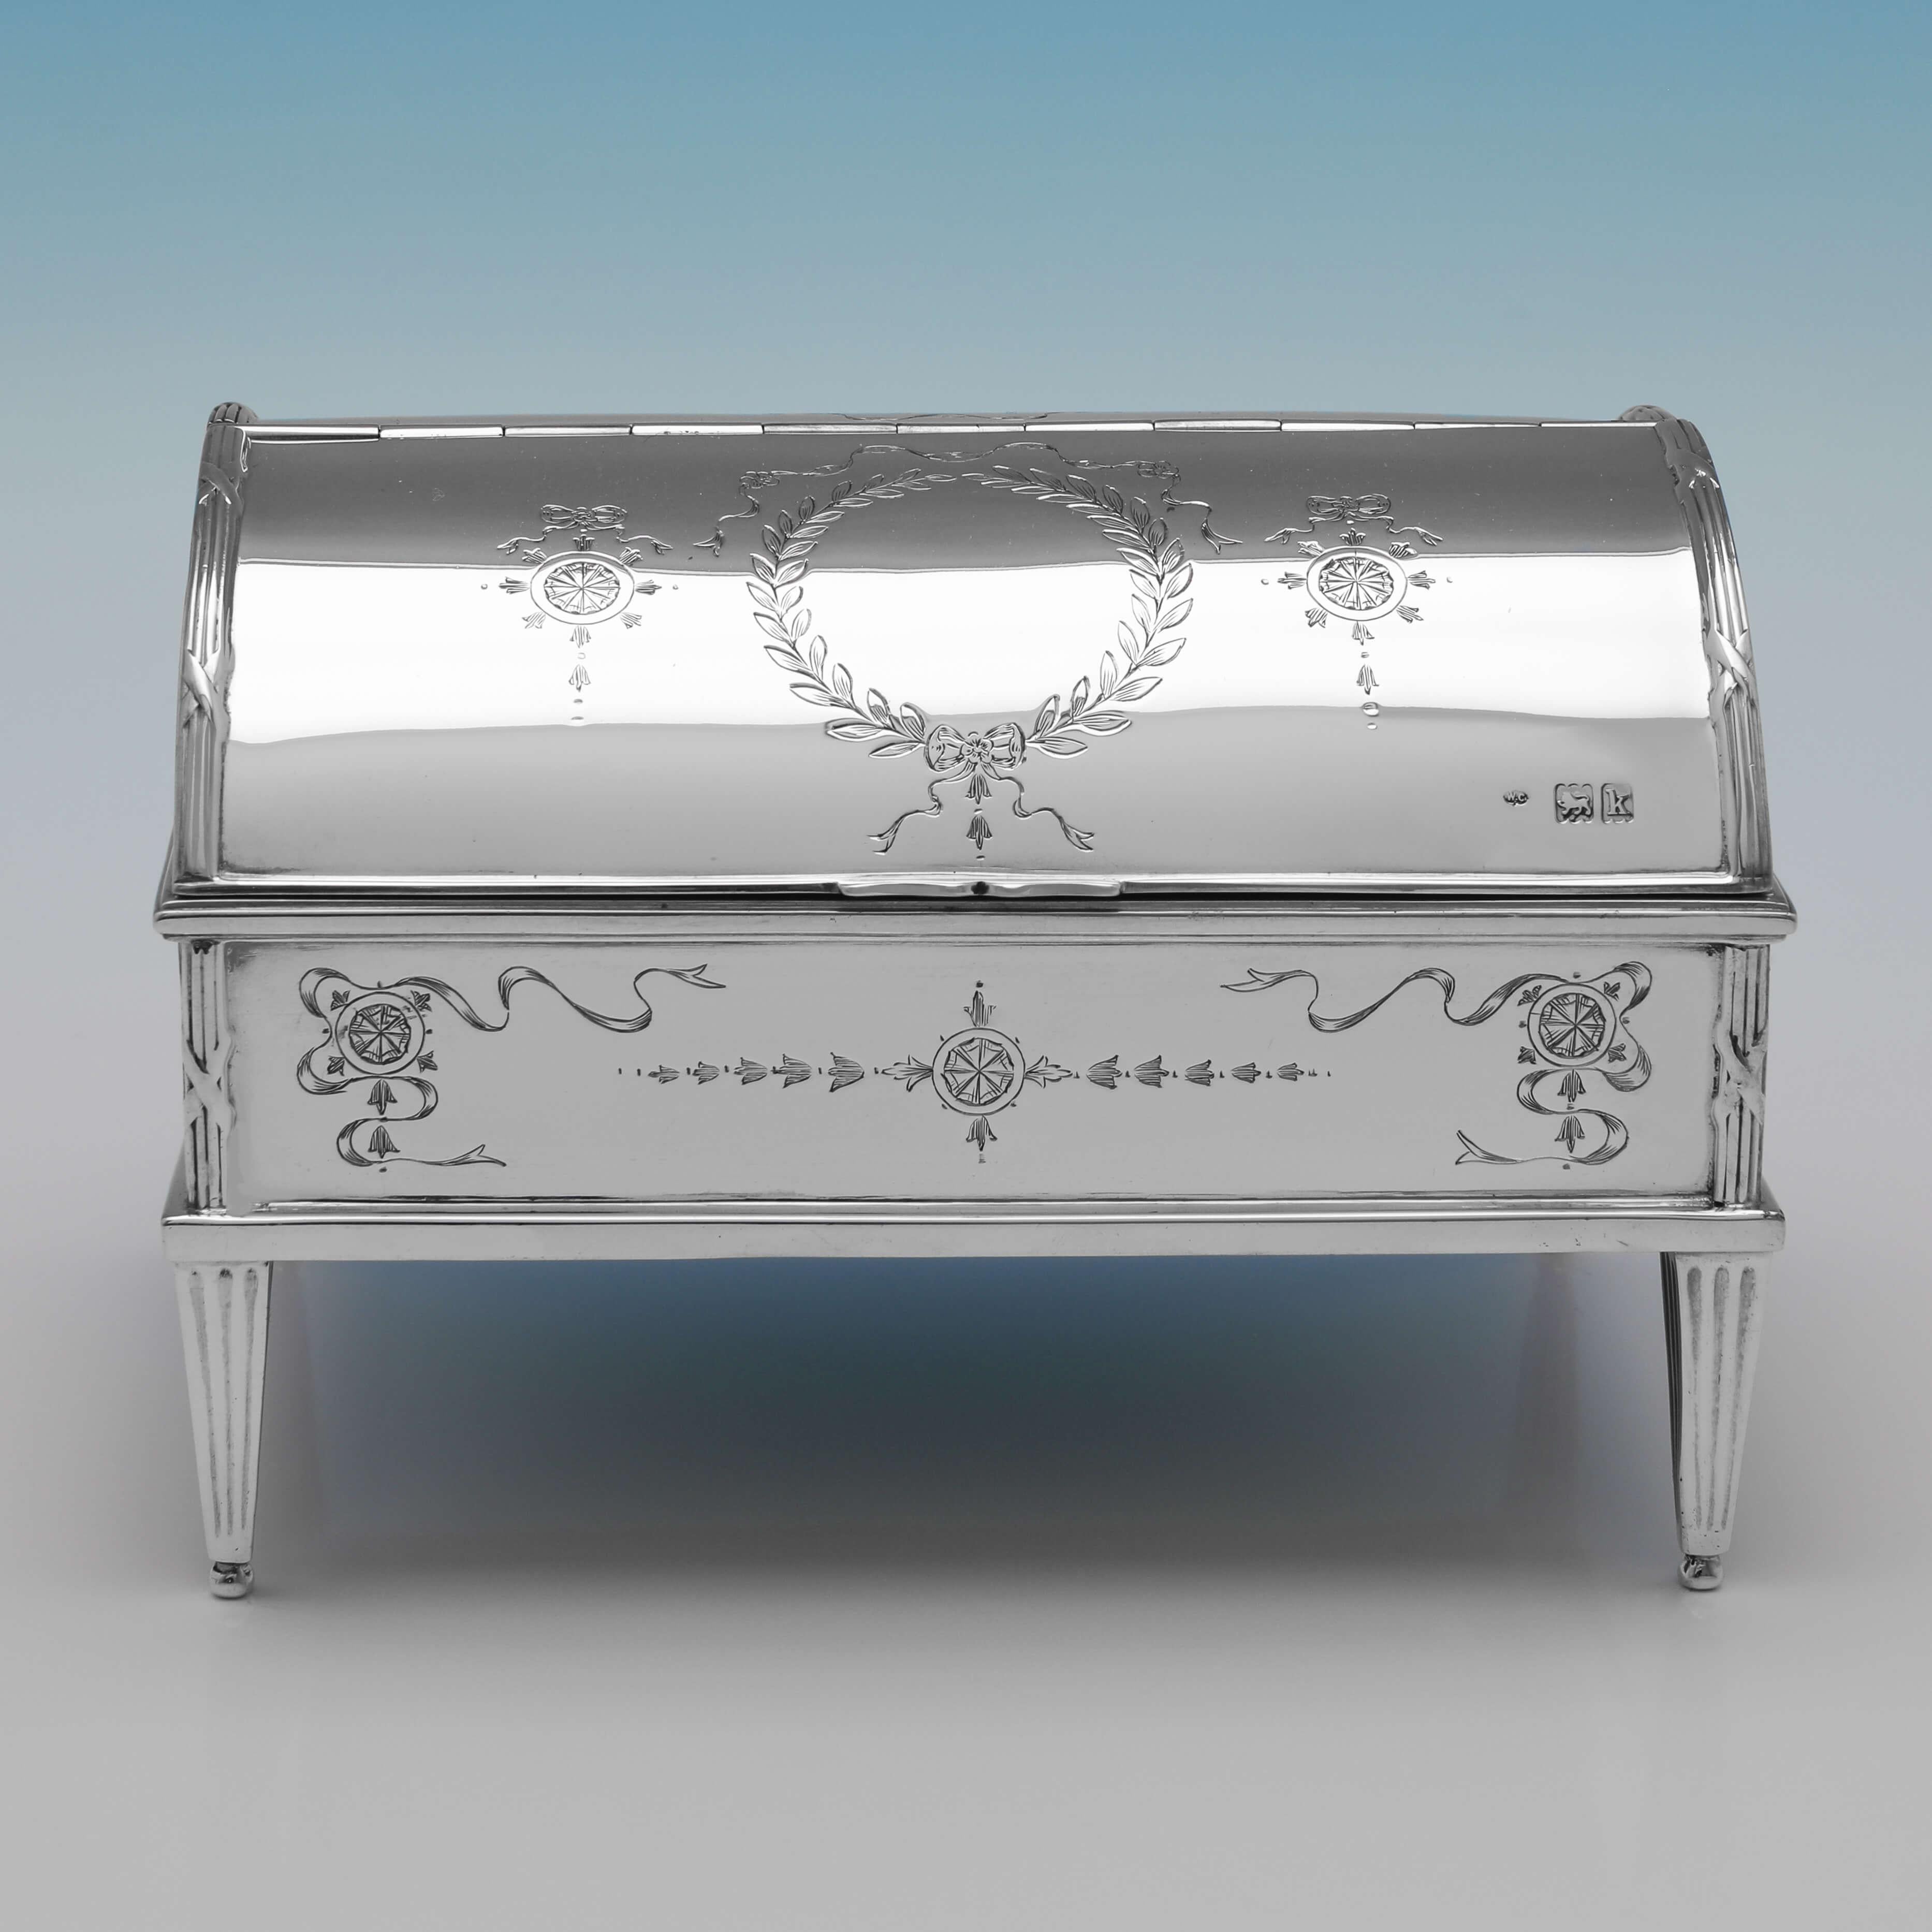 Hallmarked in London in 1905 by William Comyns, this very attractive, Edwardian, Antique Sterling Silver Jewellery Box, features Neoclassical style decoration throughout, and is lined in blue velvet. The jewellery box measures 4.25